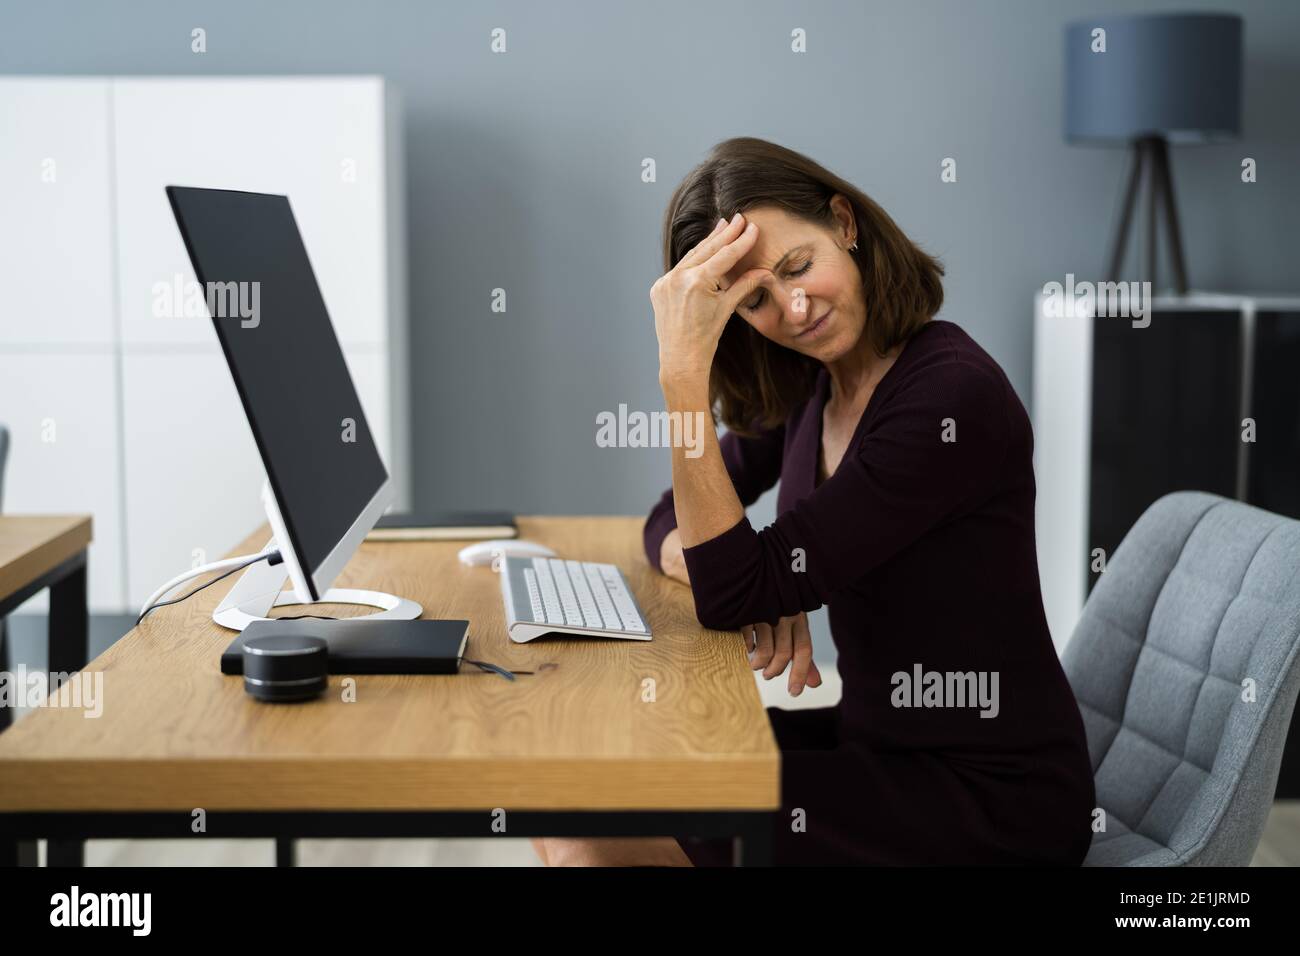 Stressed Upset Business Employee Woman At Work Stock Photo